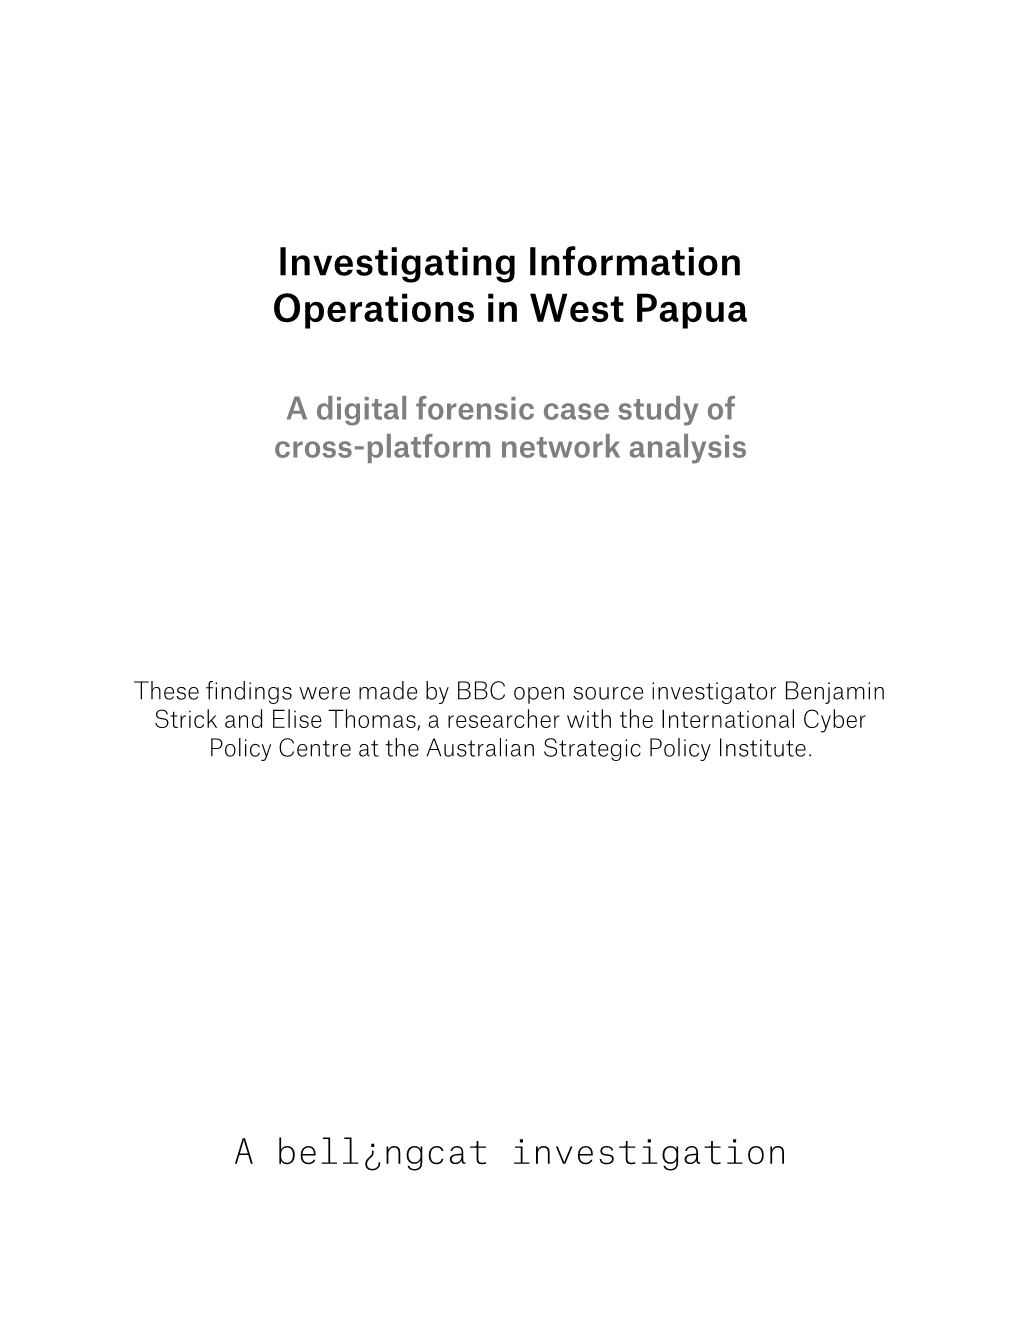 Investigating Information Operations in West Papua